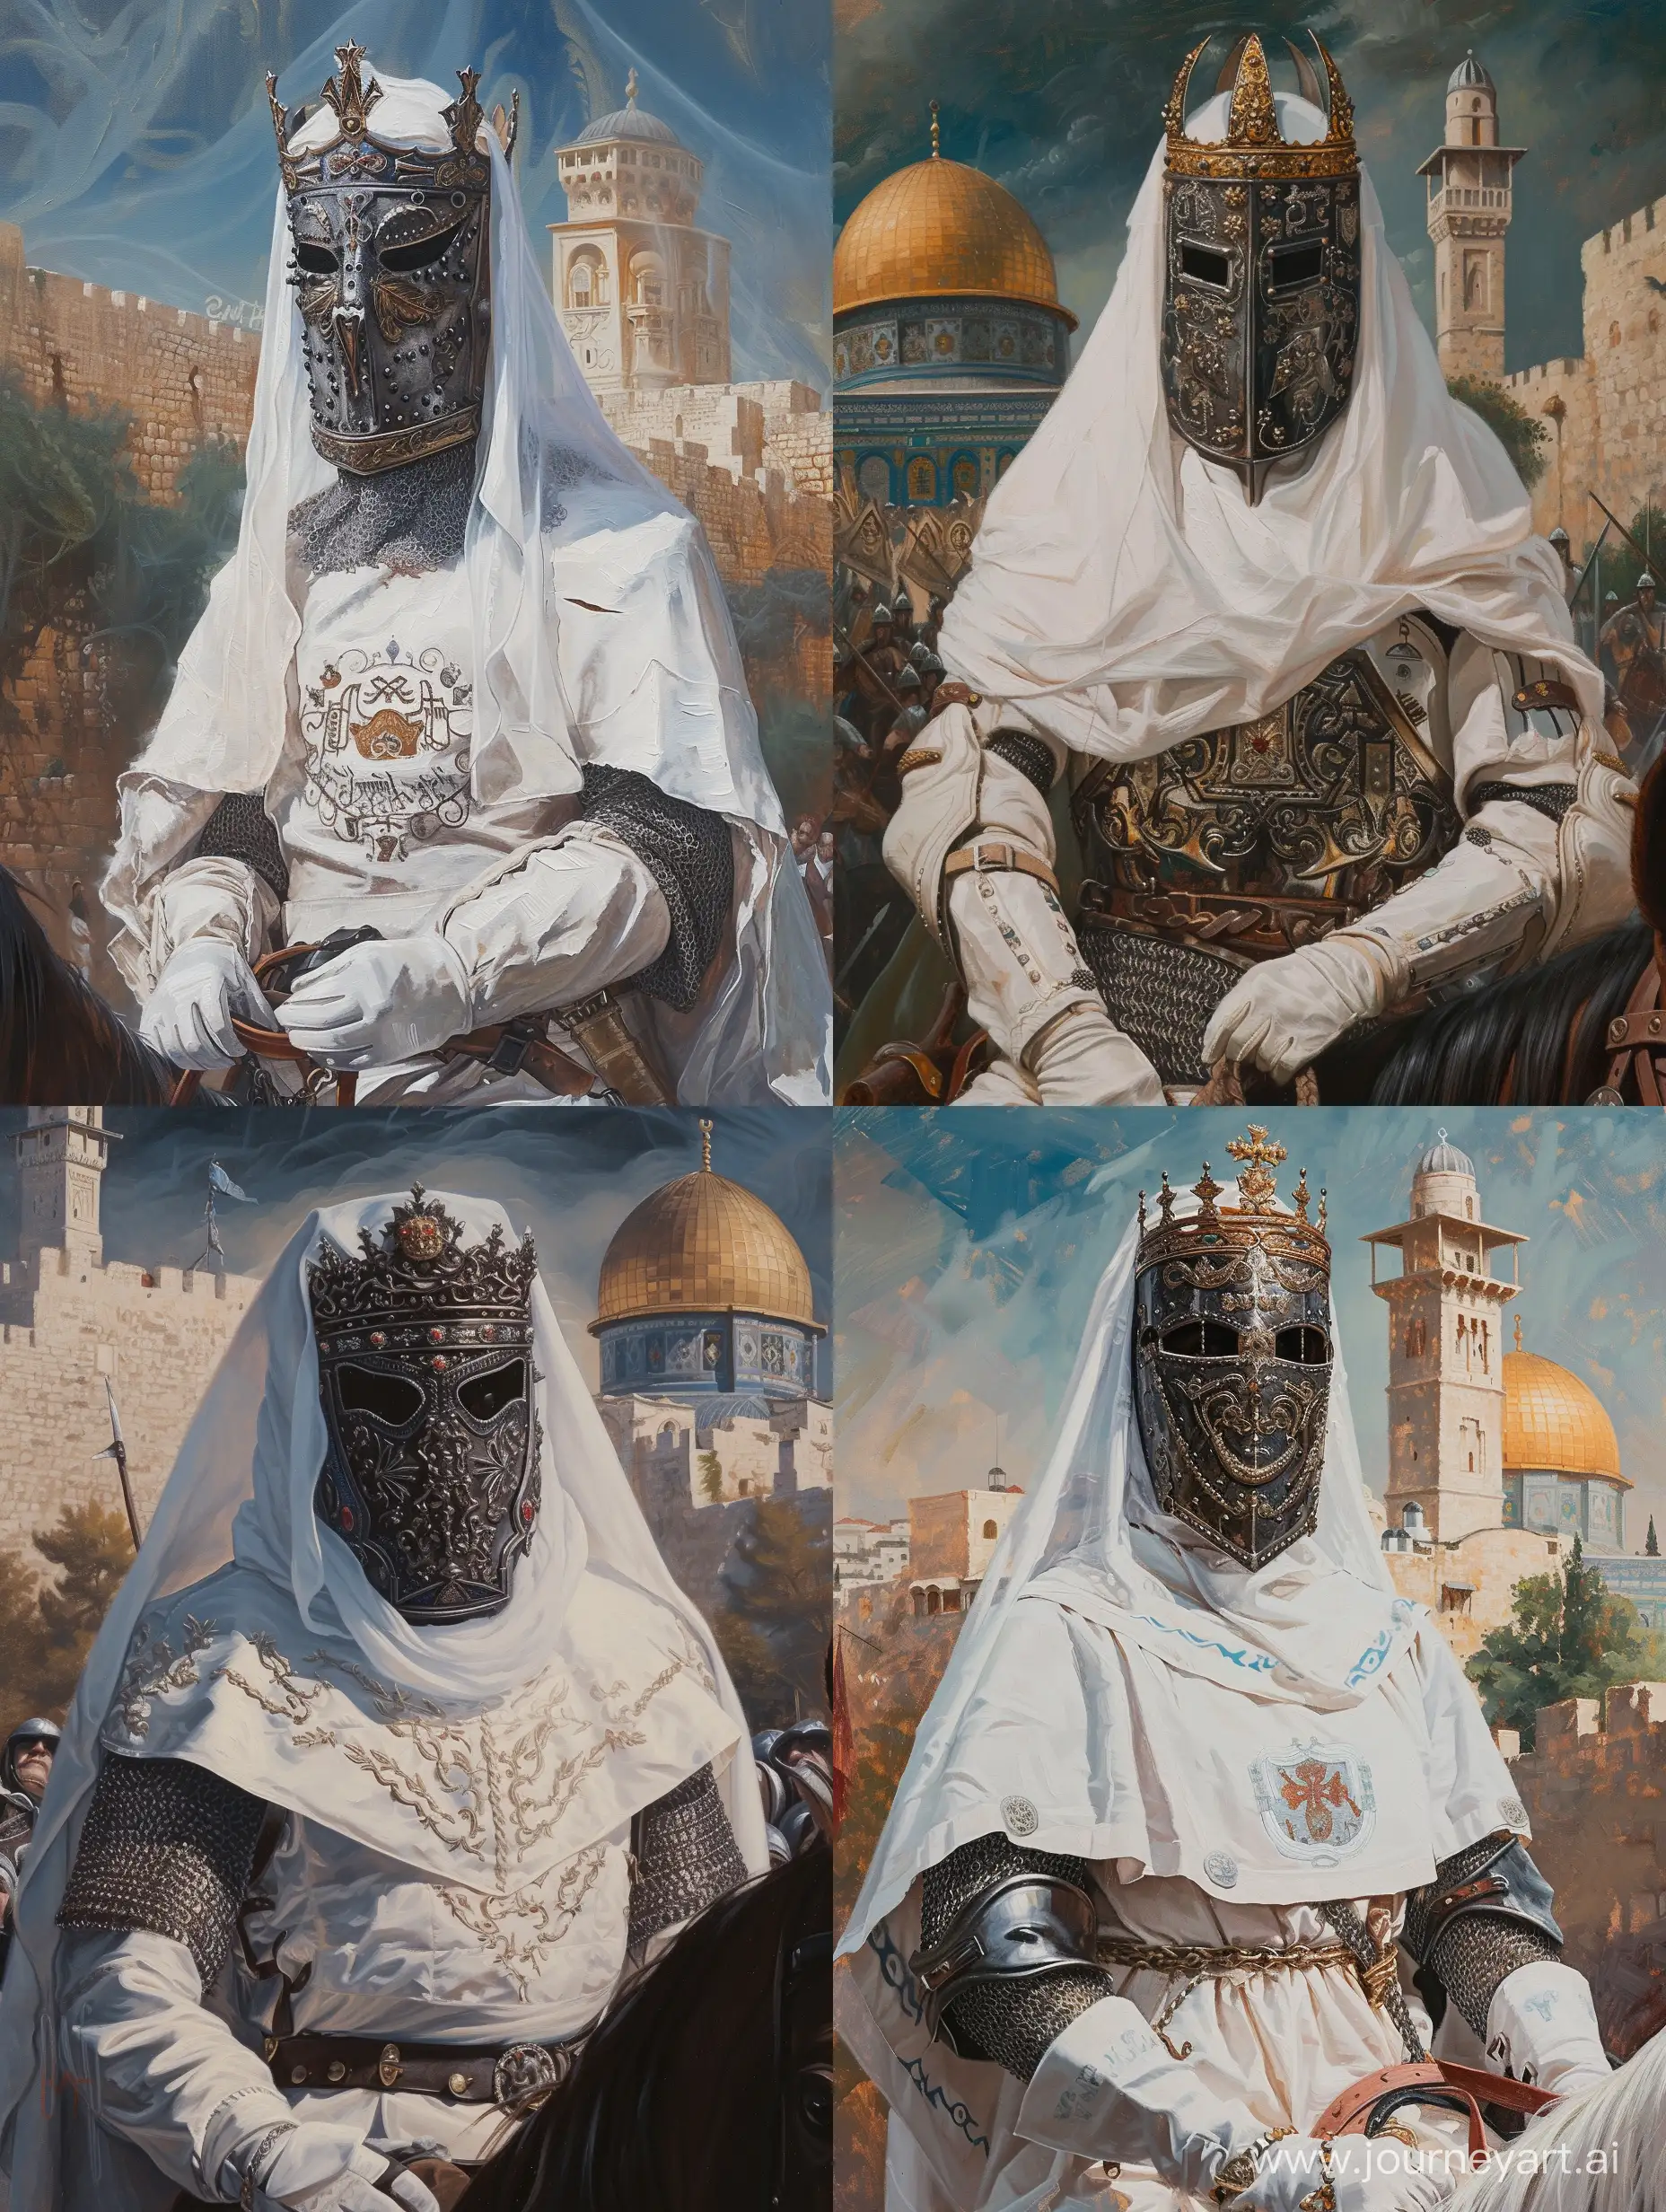 King Baldwin IV of Jerusalem. He is wearing white tabard over chainmail. Full face covering iron mask with embroidered. White veil and king crown. White silk gloves. He is on his horse. Jerusalem themed background. Oil painting. Brush strikes.